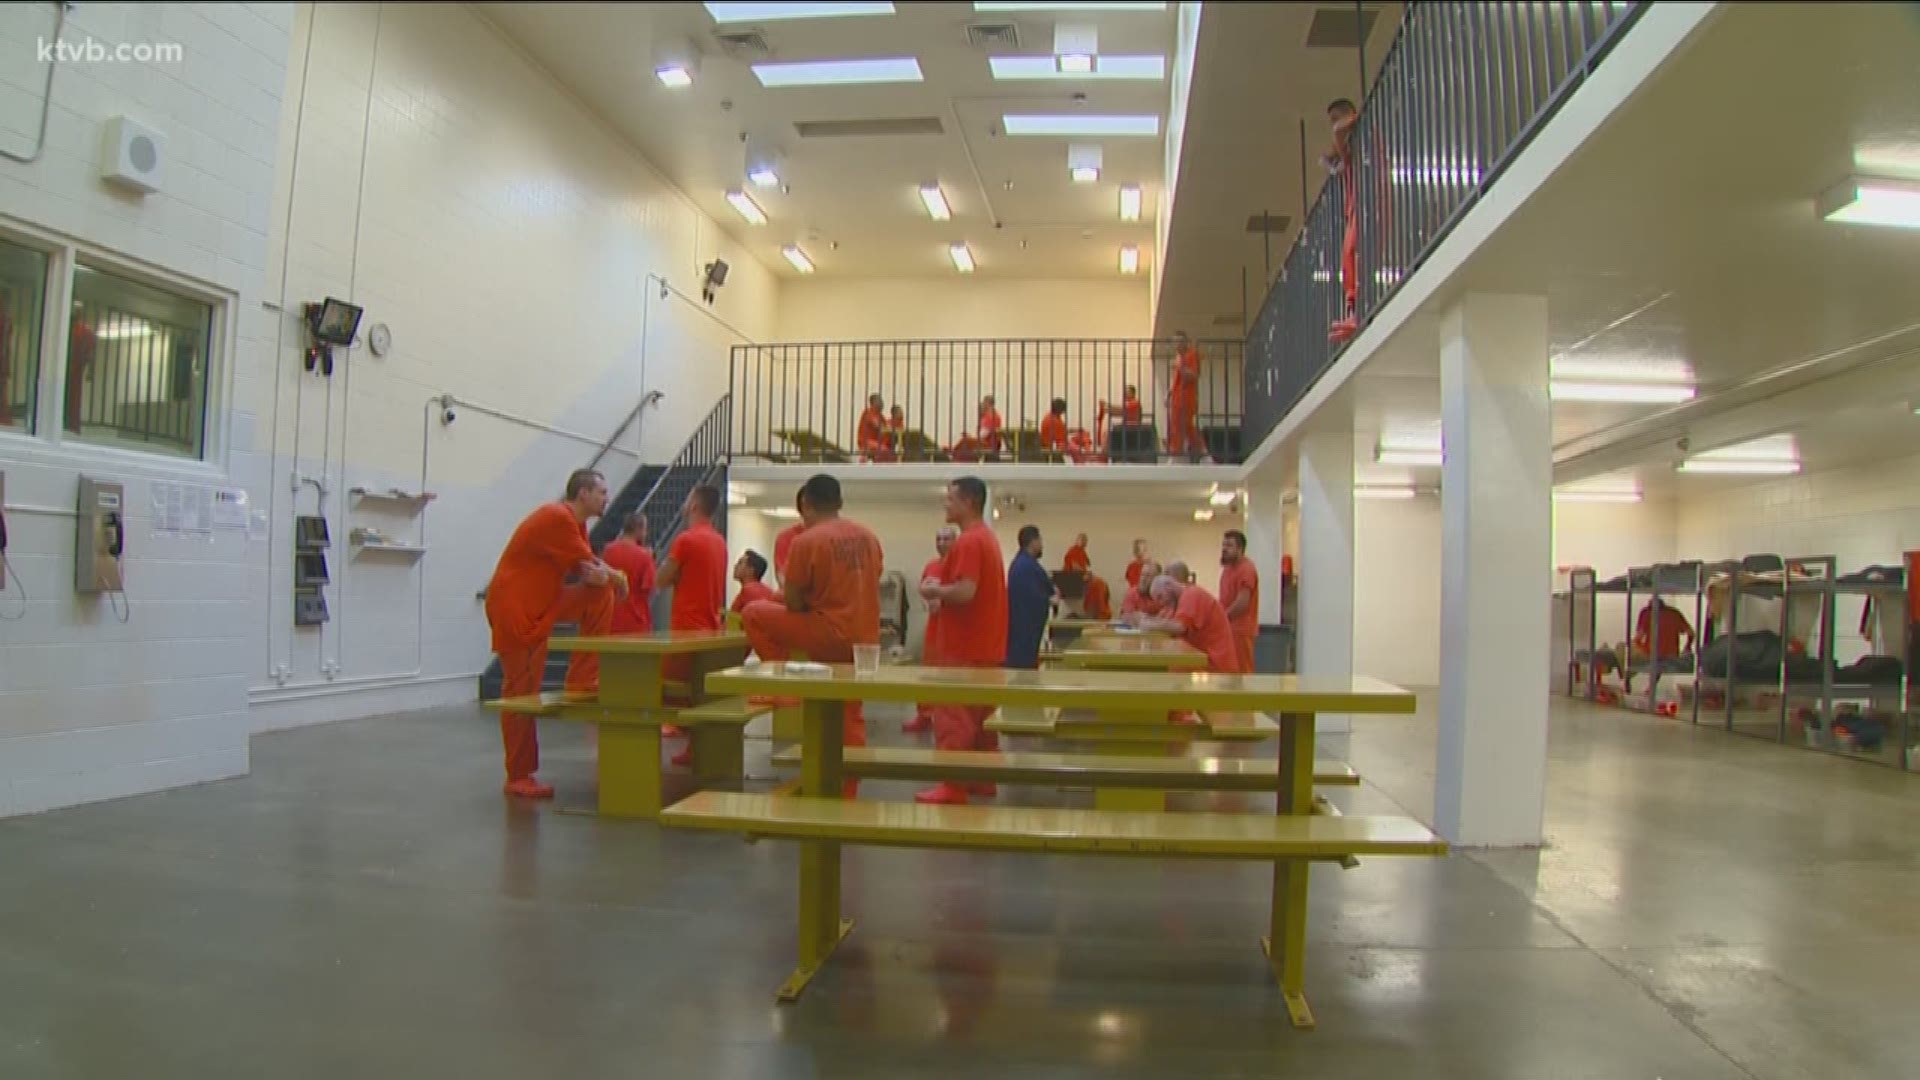 The new site will let the public know exactly how many inmates are housed in the jail.